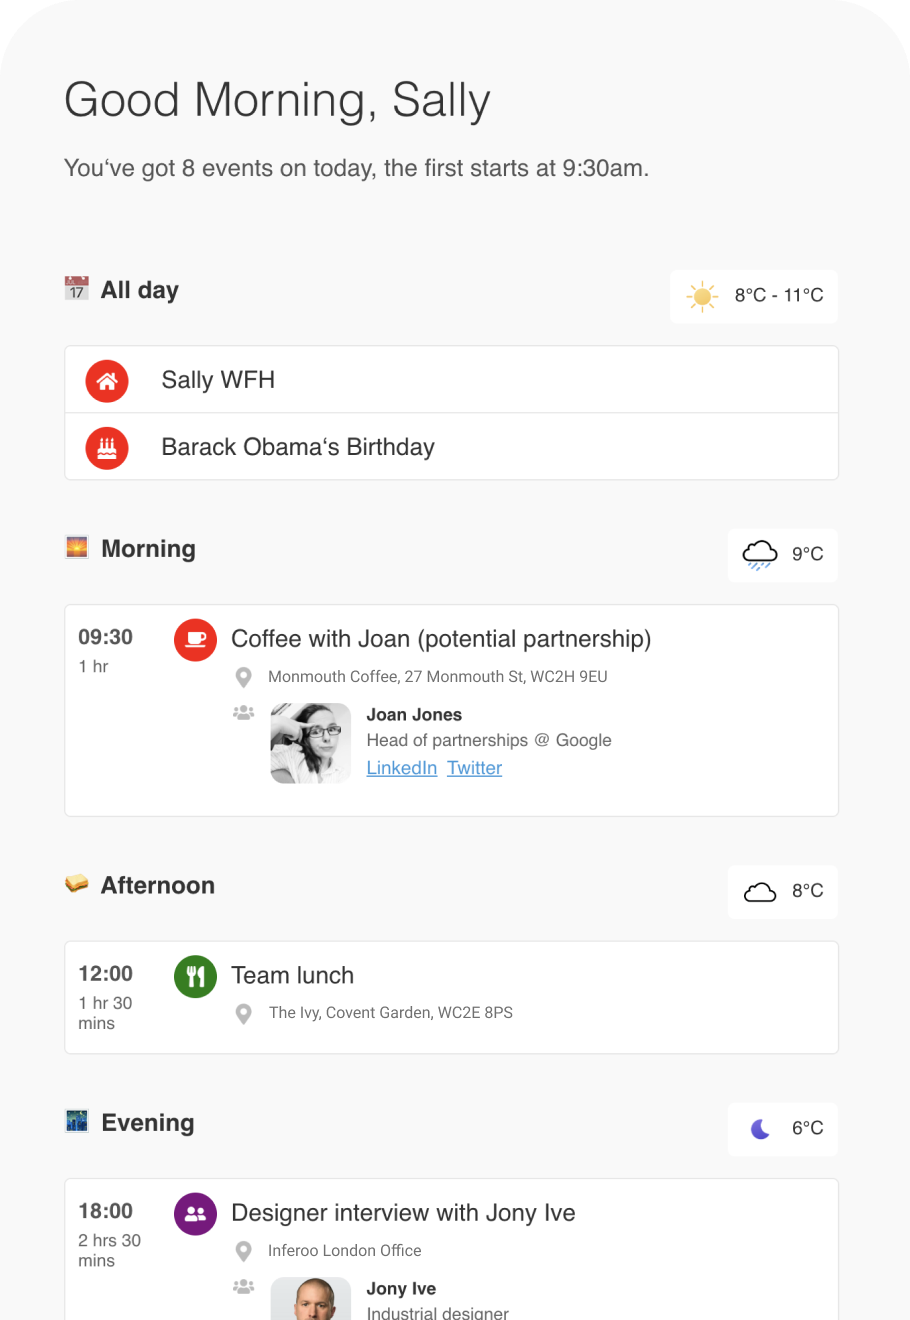 Screenshot of how our brefing email looks. Contains calendar events, weather and news.